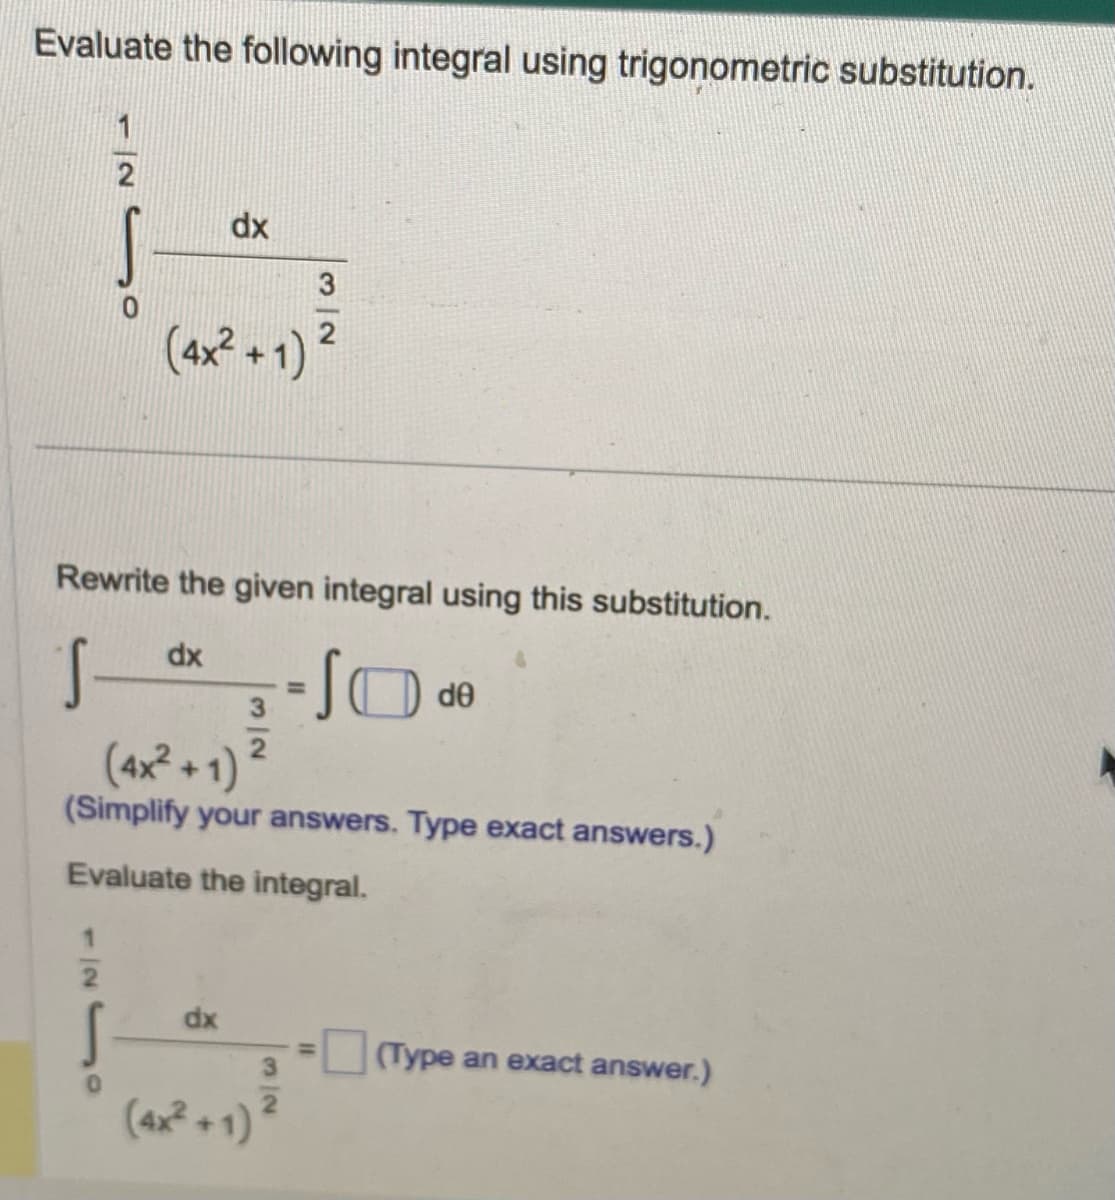 Evaluate the following integral using trigonometric substitution.
1
2
1
dx
(4x²+1)
Rewrite the given integral using this substitution.
dx
S-
dx
3
32
(4x²+1)
(Simplify your answers. Type exact answers.)
Evaluate the integral.
(4x² +1) ²
de
(Type an exact answer.)